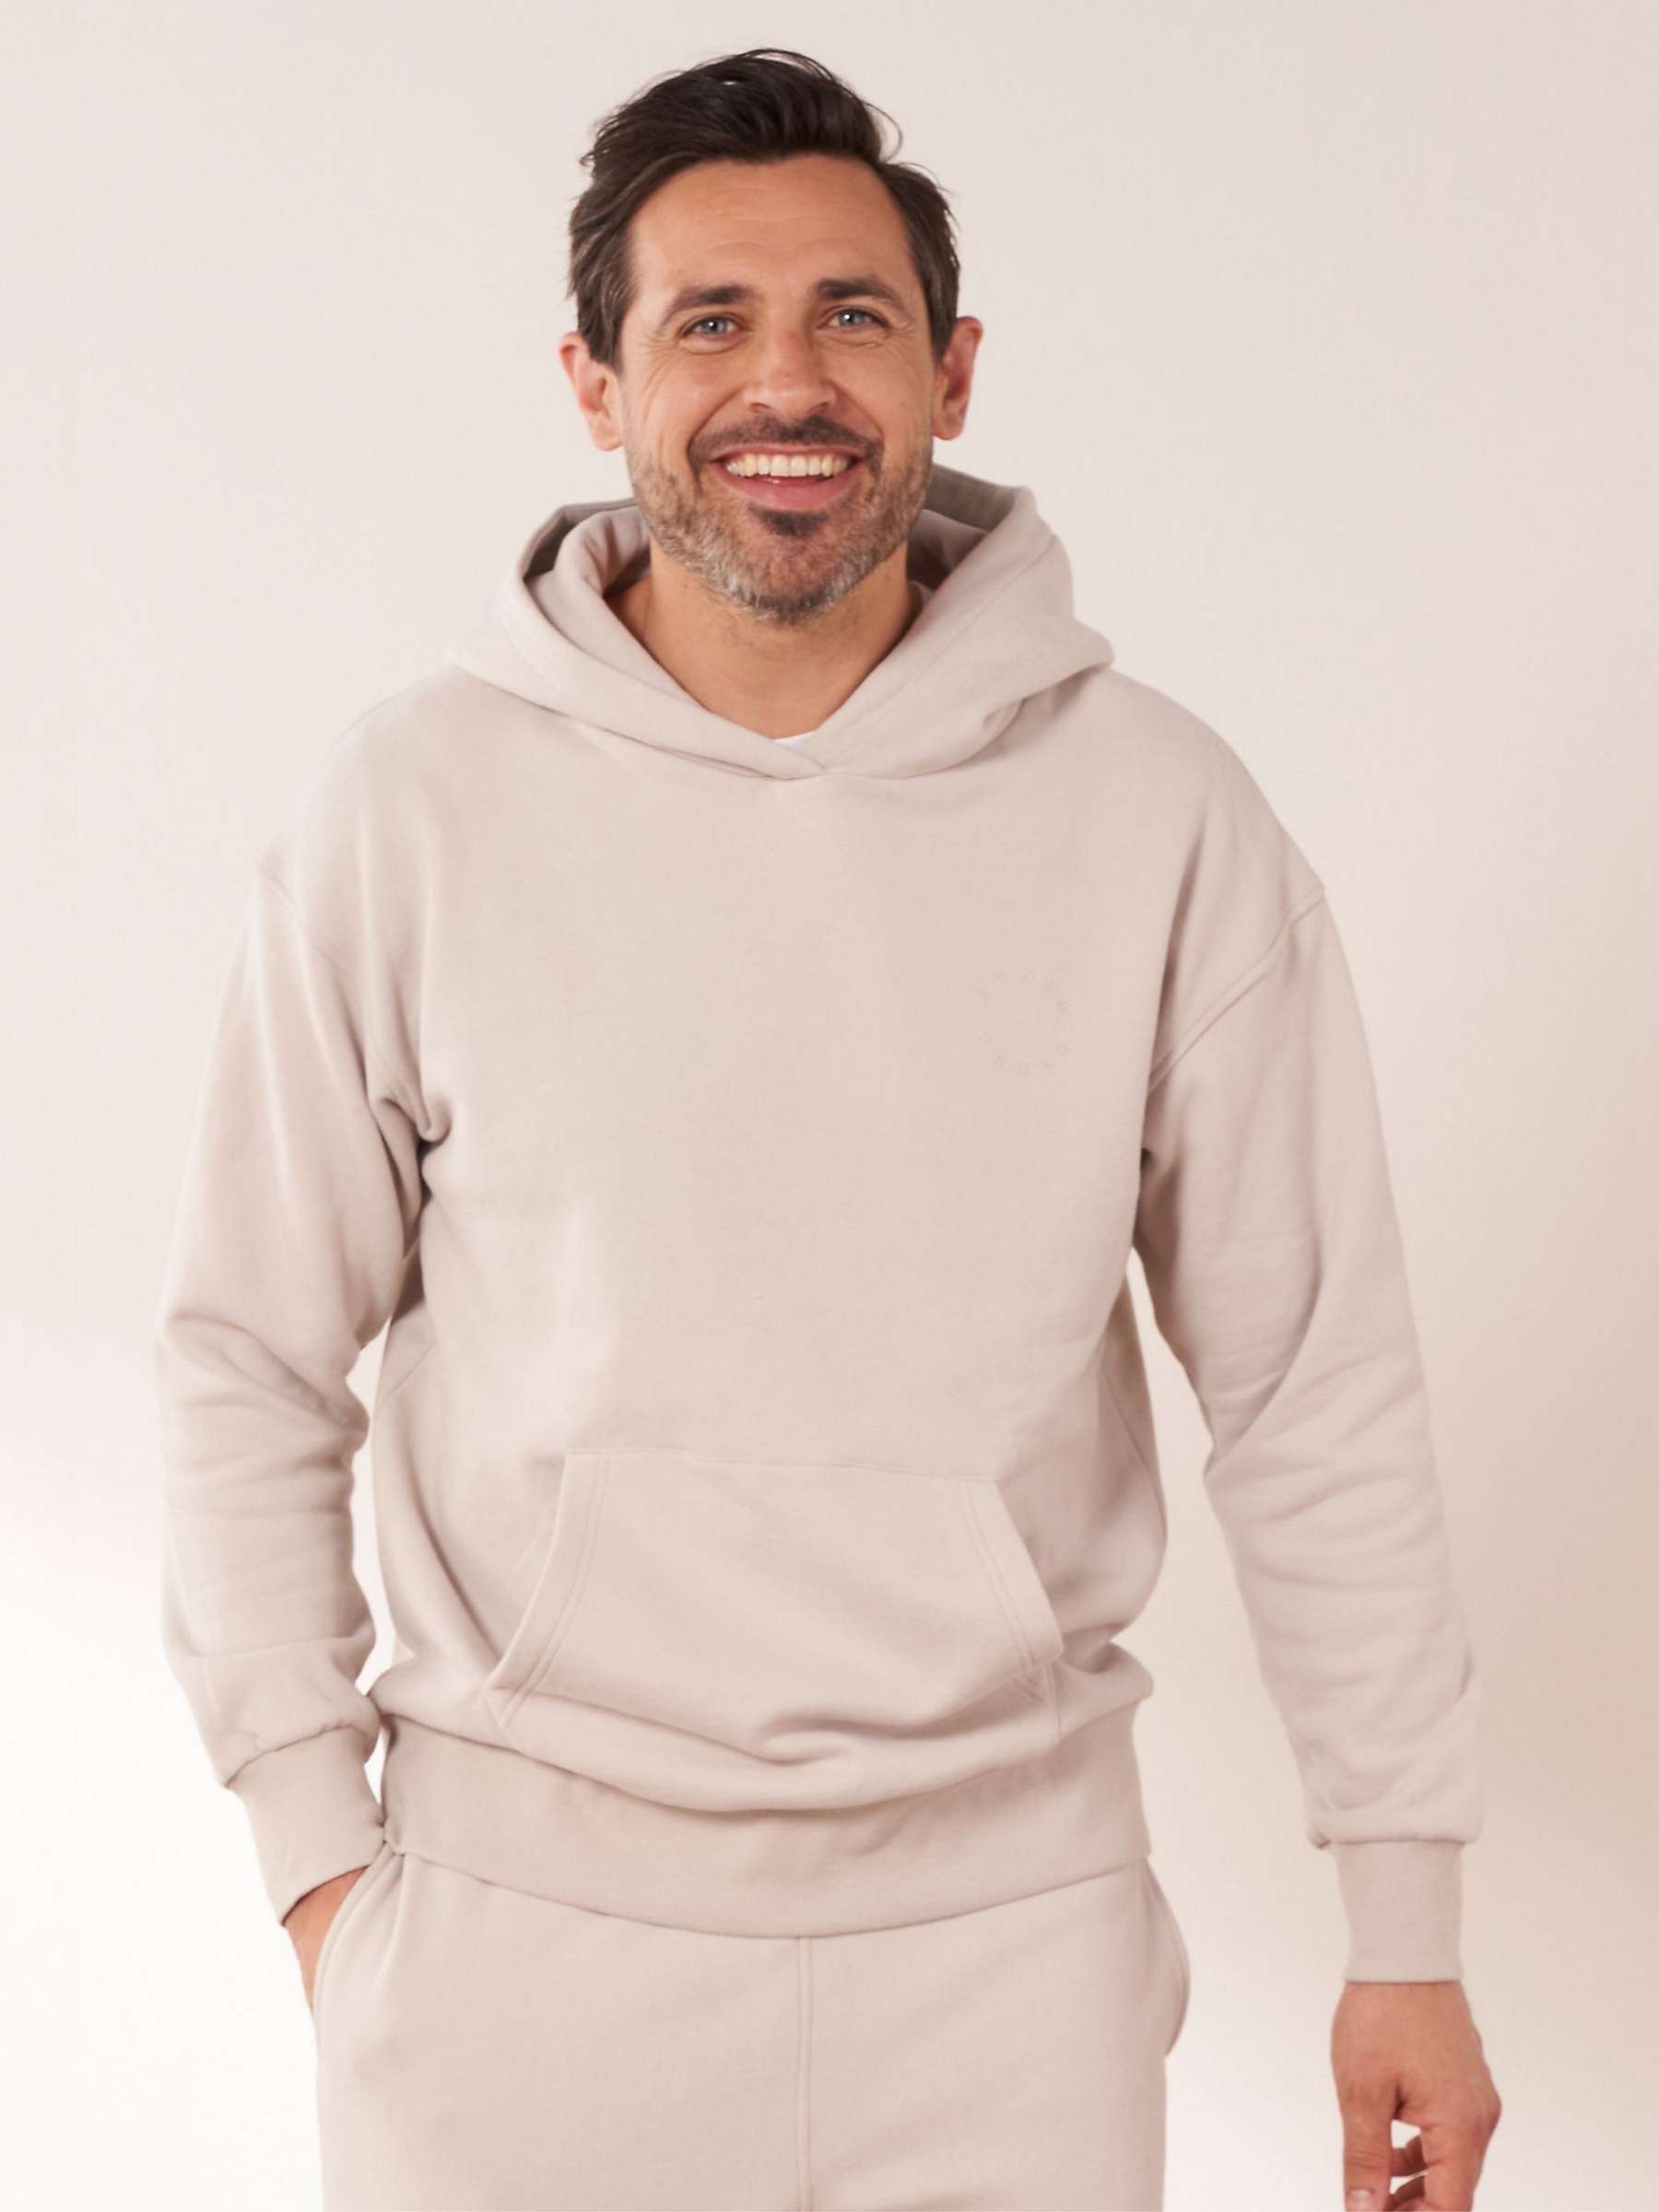 Buy Truly Chiltern Organic Cotton Hoodie Online at johnlewis.com